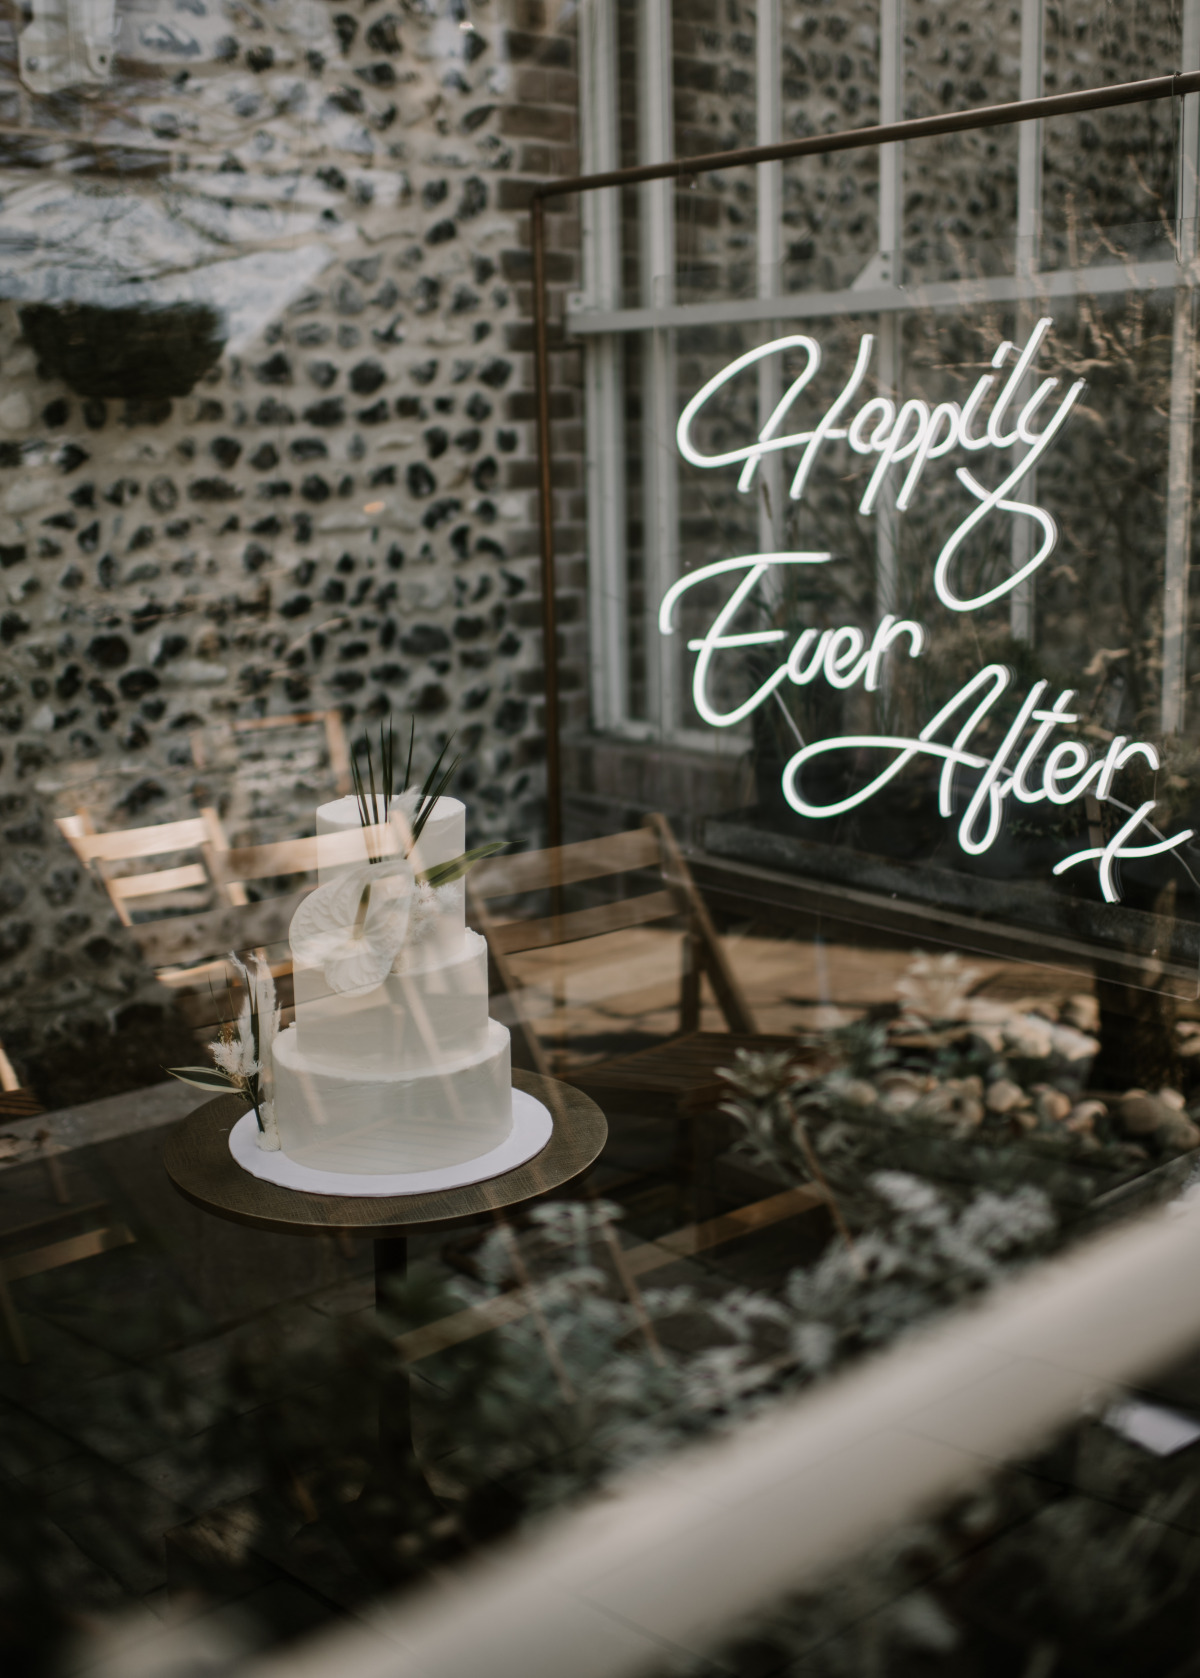 happily ever after neon sign with white wedding cake